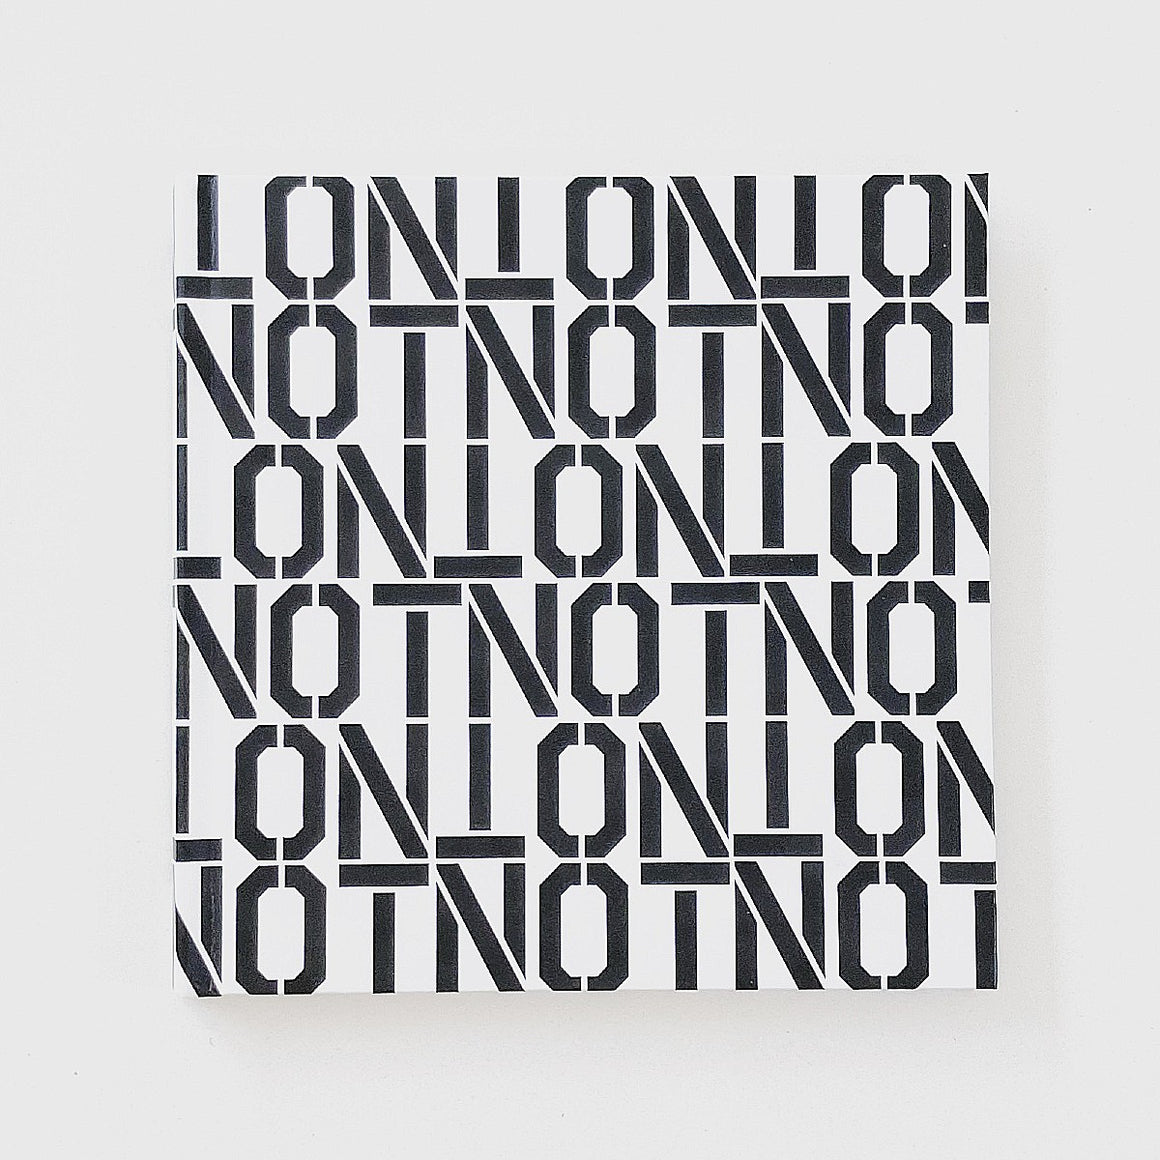 The Cover of the Artists book NOTNOT: Digital Realities by Cam Scott. The cover features repeat block letter that spell "NOT" in black on a white background.